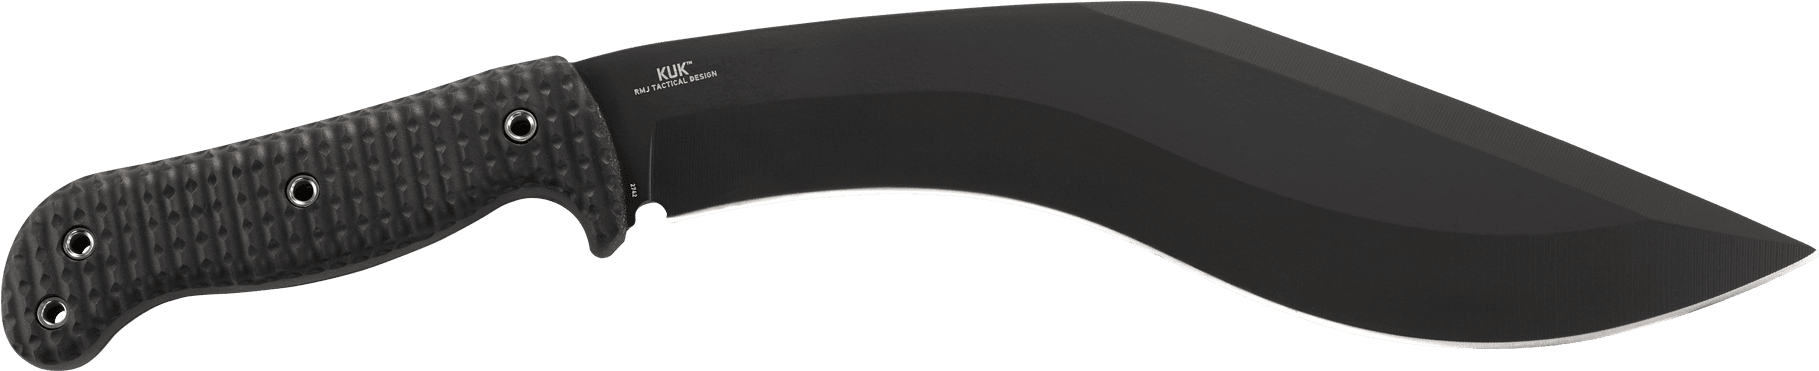 A Black And White Curved Object